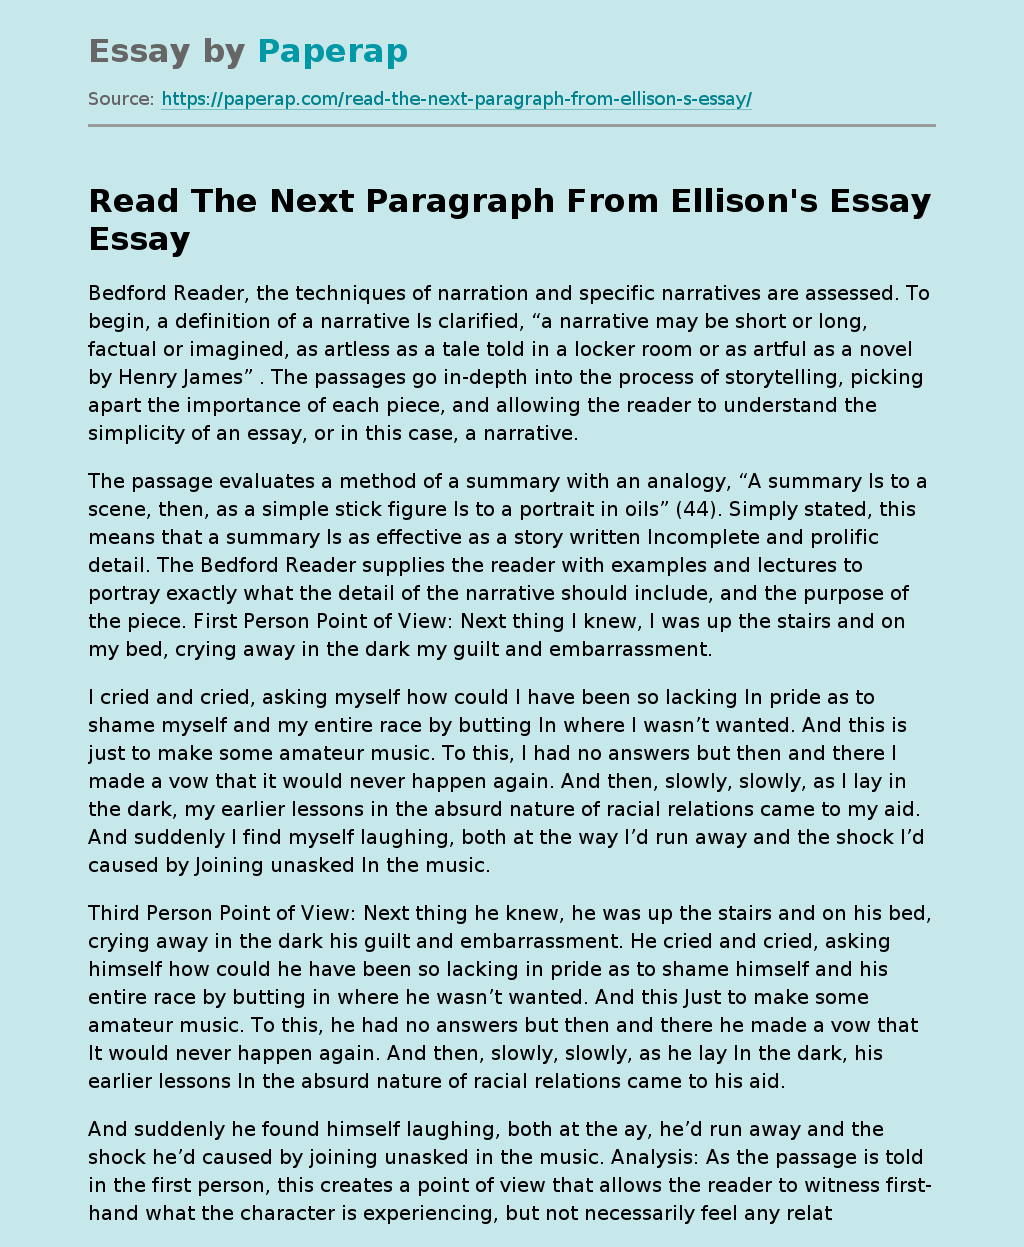 Read The Next Paragraph From Ellison's Essay